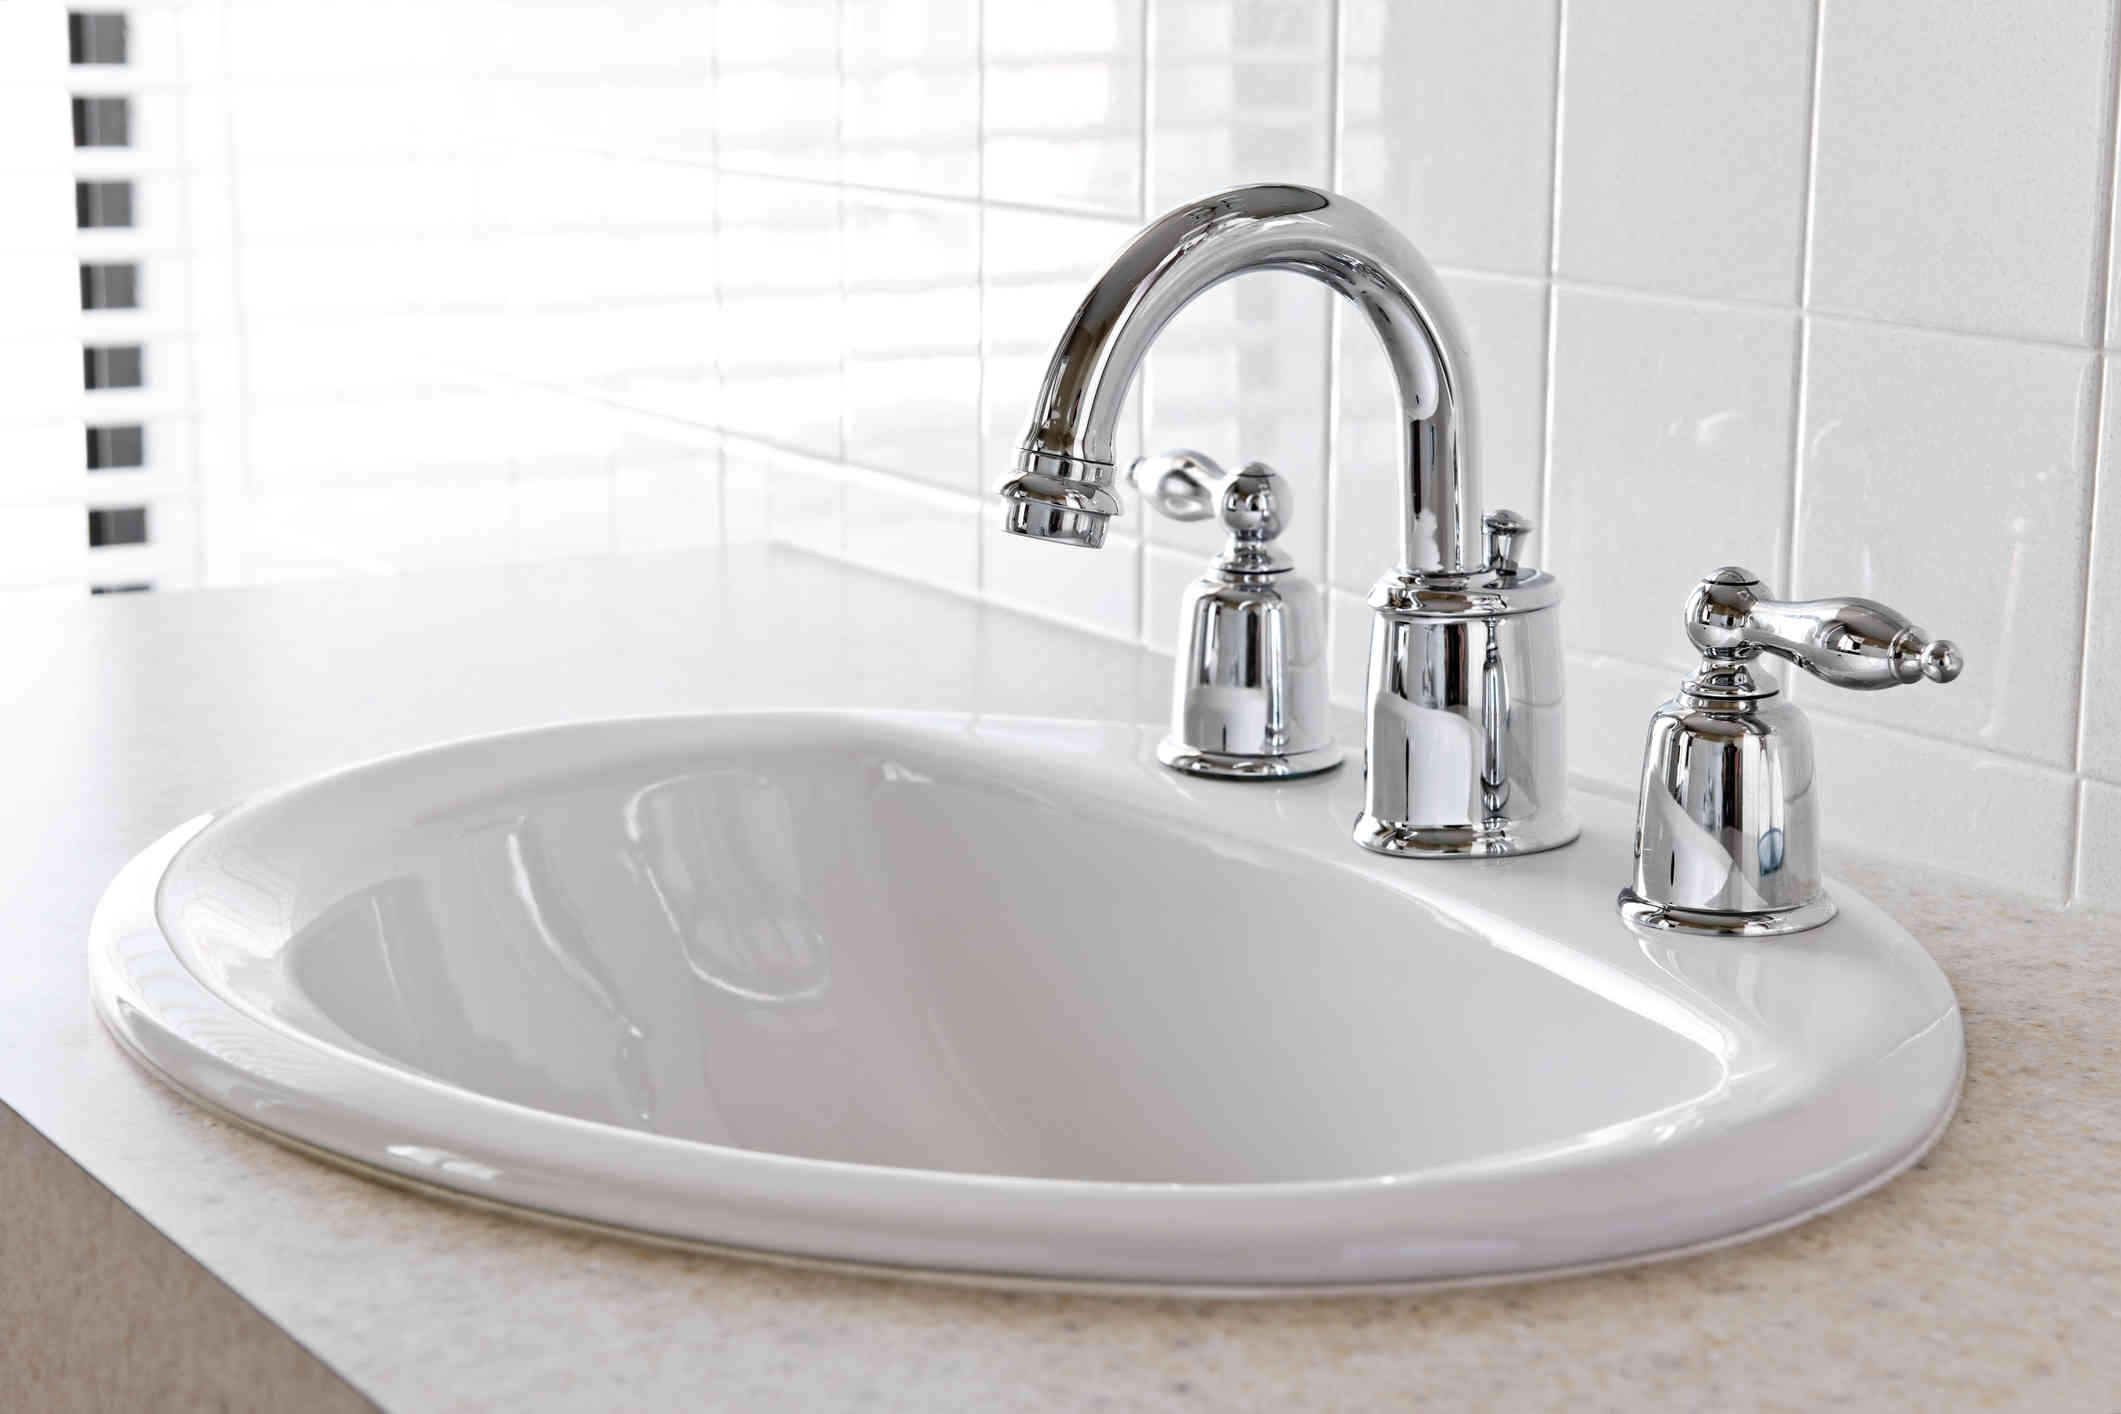 Global Specialty Faucets Market 2020 With COVID-19 Update | Moen ...